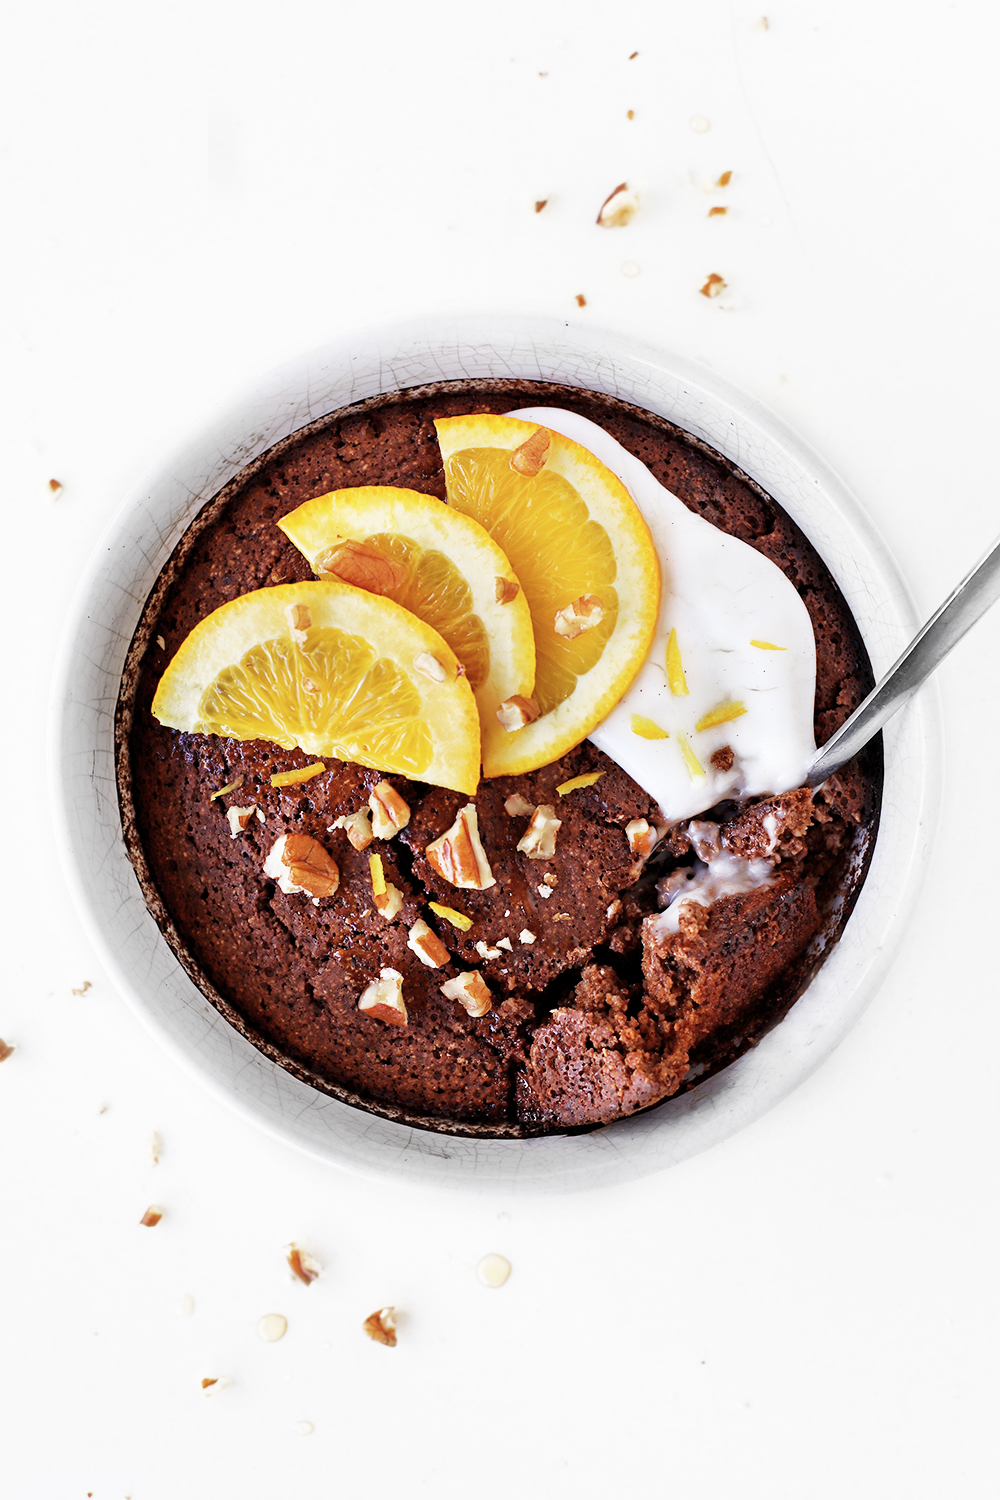 Ceramic bowl of Chocolate Orange Baked Oats topped with dairy free coconut yoghurt, orange segments and chopped nuts